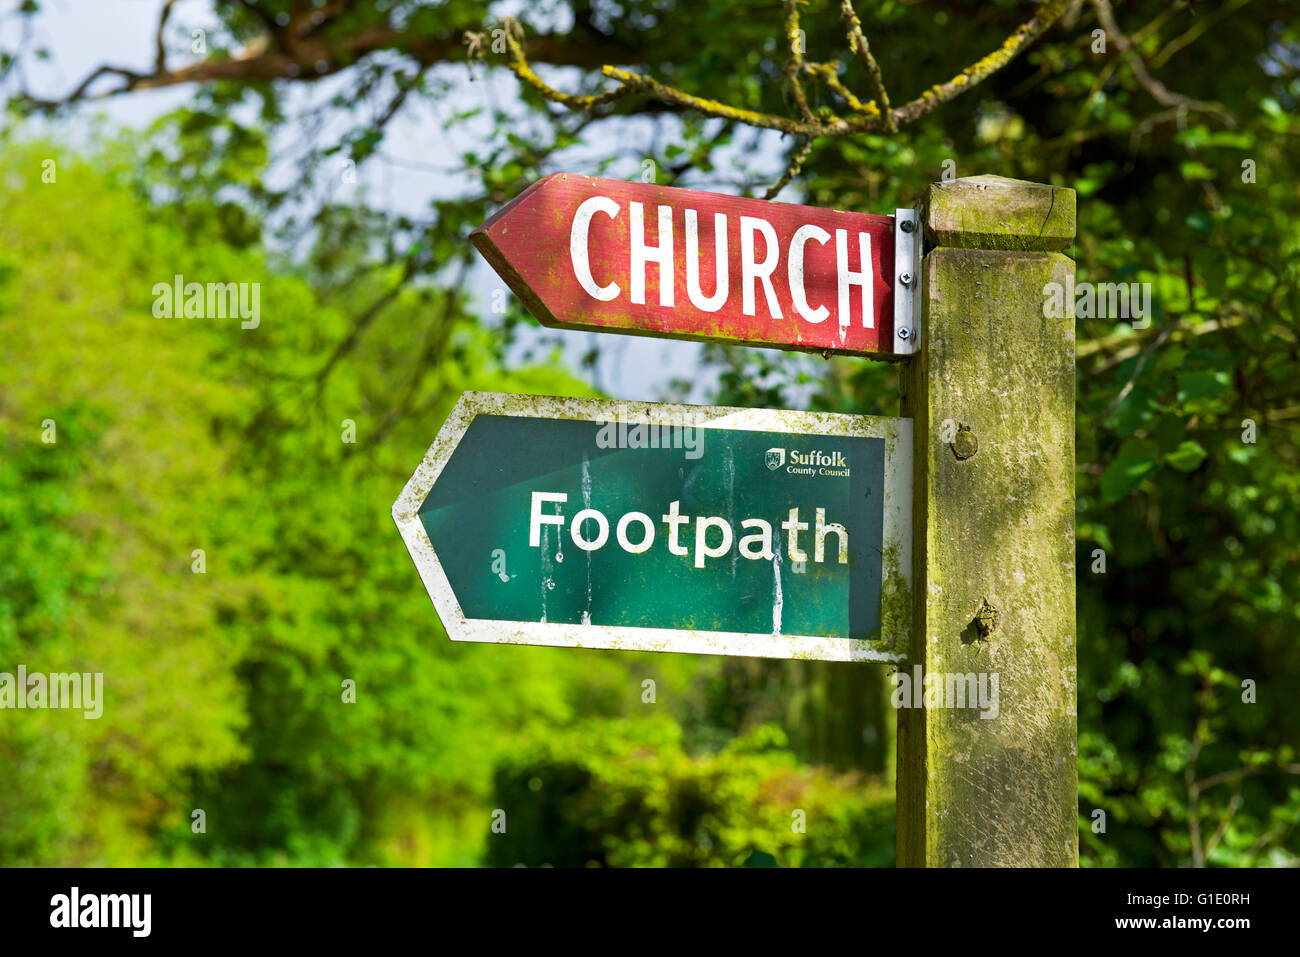 Signs for church and footpath, England UK Stock Photo